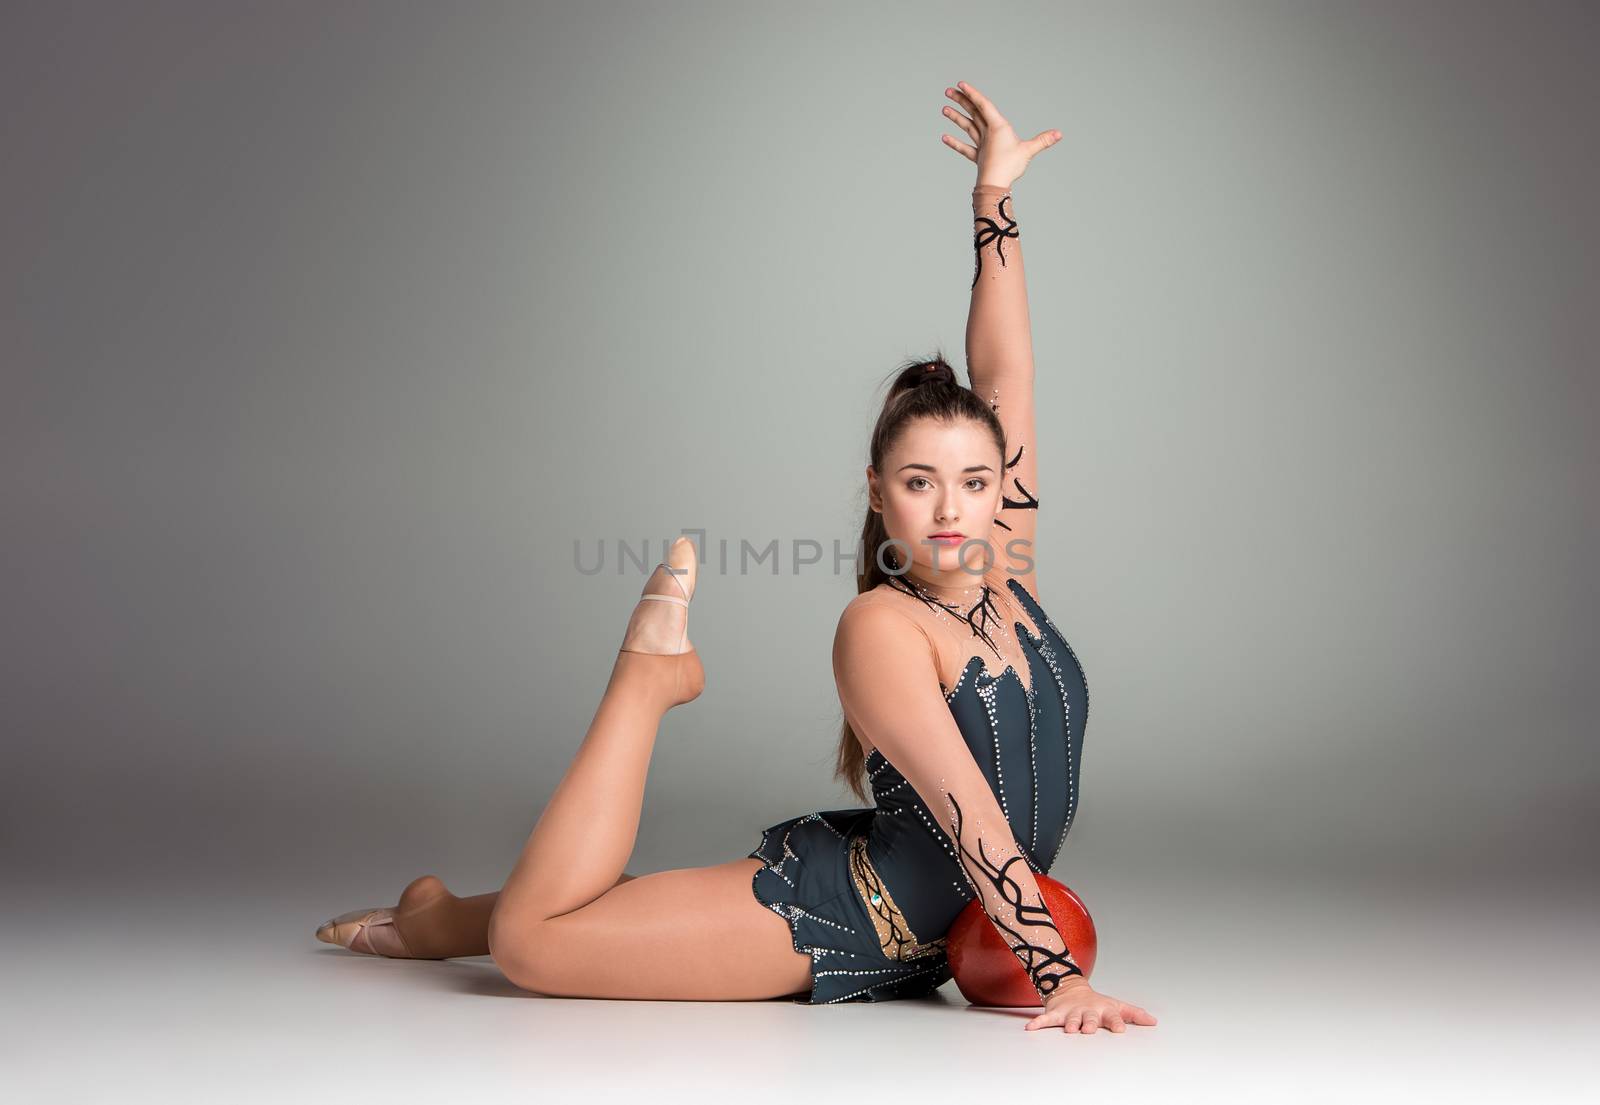 teenager doing gymnastics exercises with red gymnastic ball on a gray background